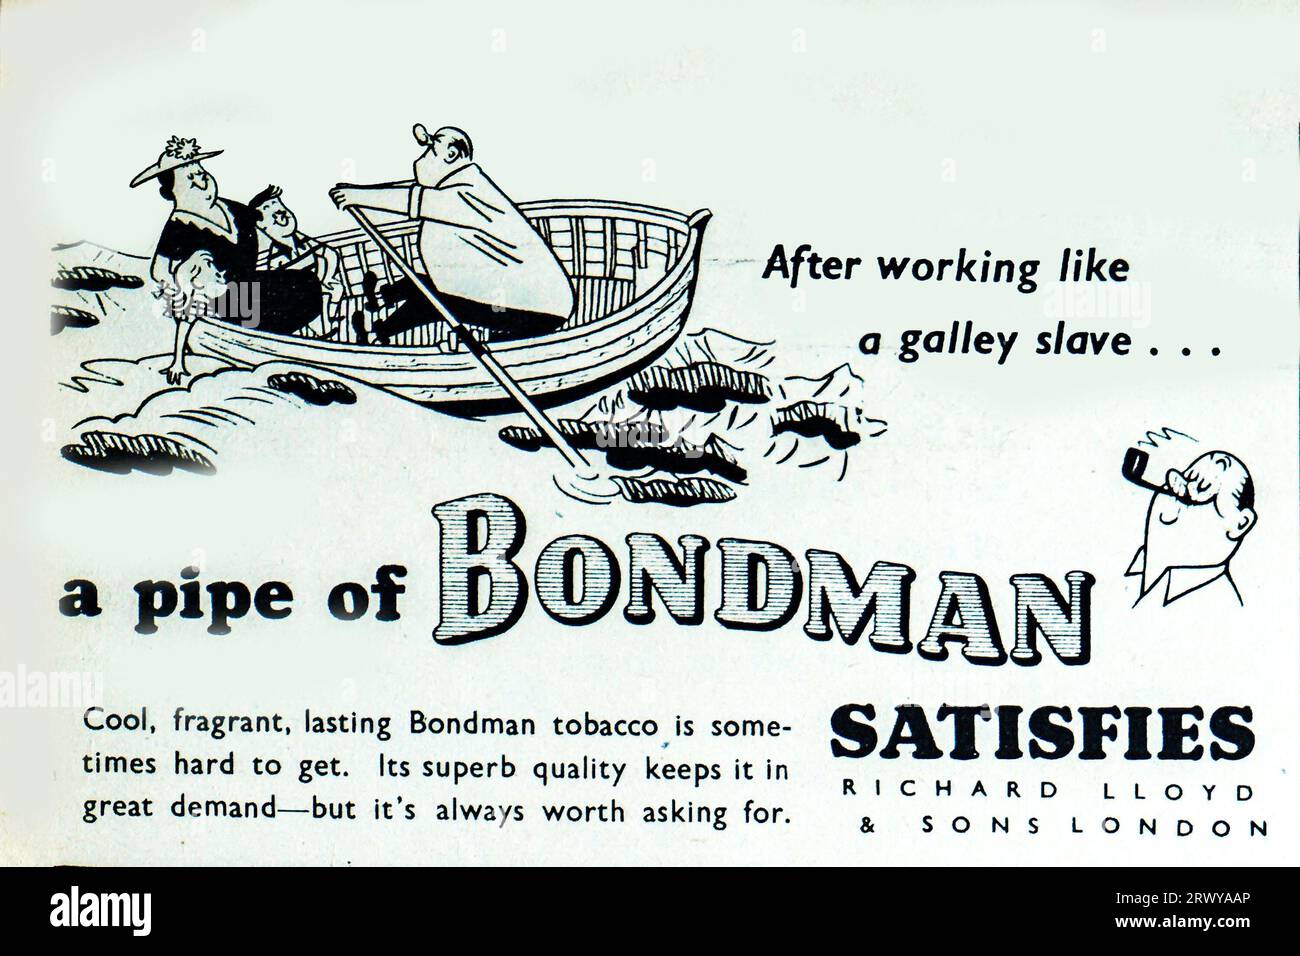 A 1950 advertisement for Bondman Pipe Tobacco, Marketed by Richard Lloyd & Sons of London, the illustration shows a man rowing his wife and children through the water and says that after working like a galley slave ‘A pipe of Bondman Satisfies’. Stock Photo